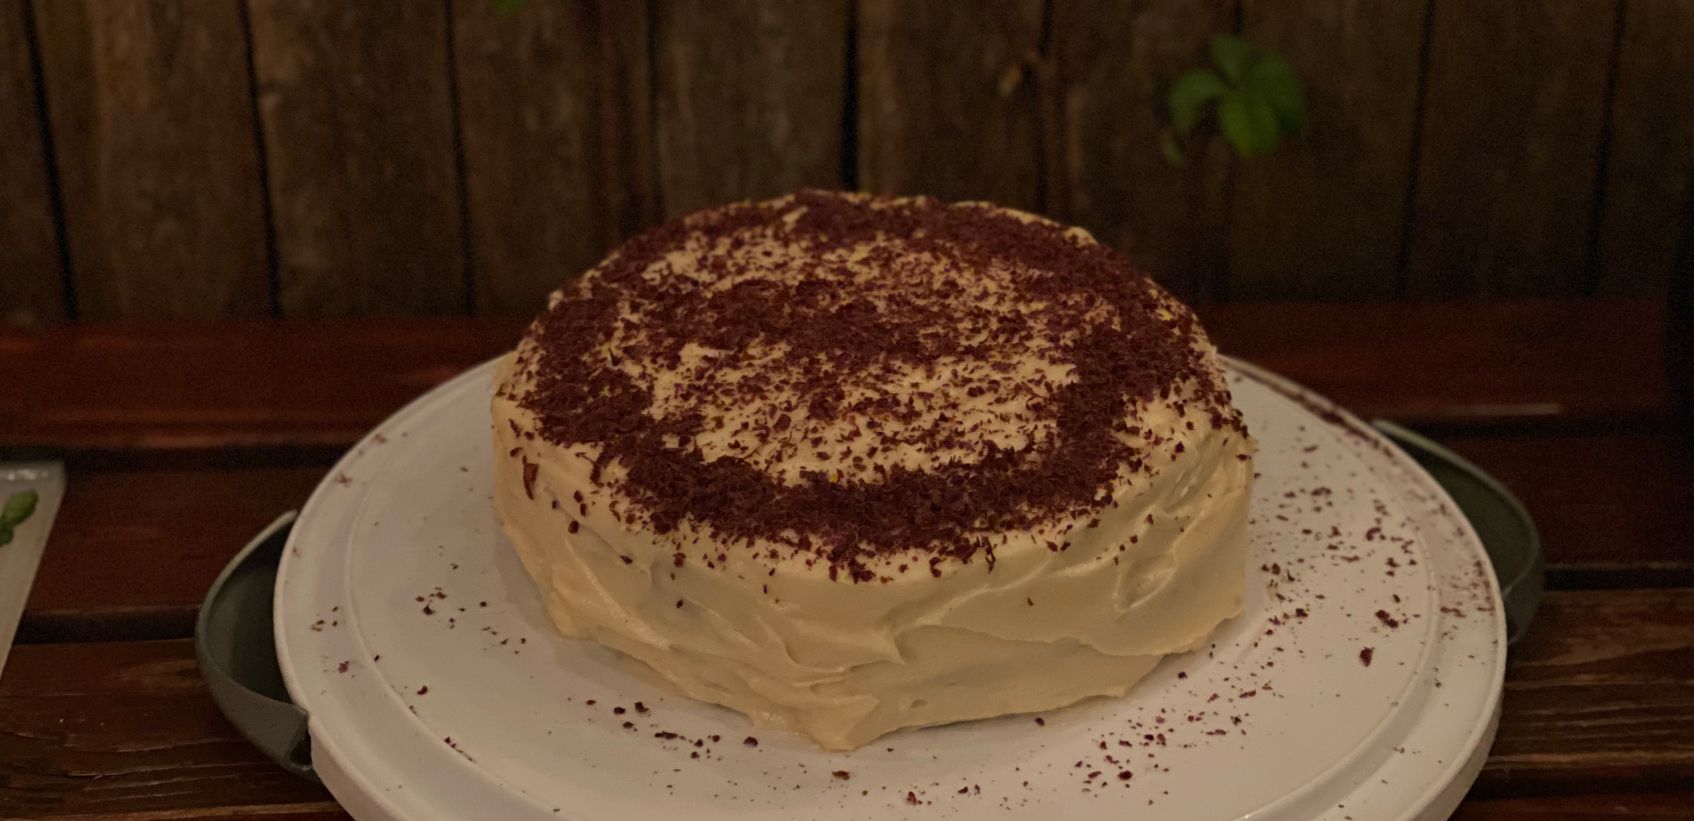 image of a cake on a plate - somewhat sloppily decorate, with cream cheese frosting and poorly arranged chocolate shavings